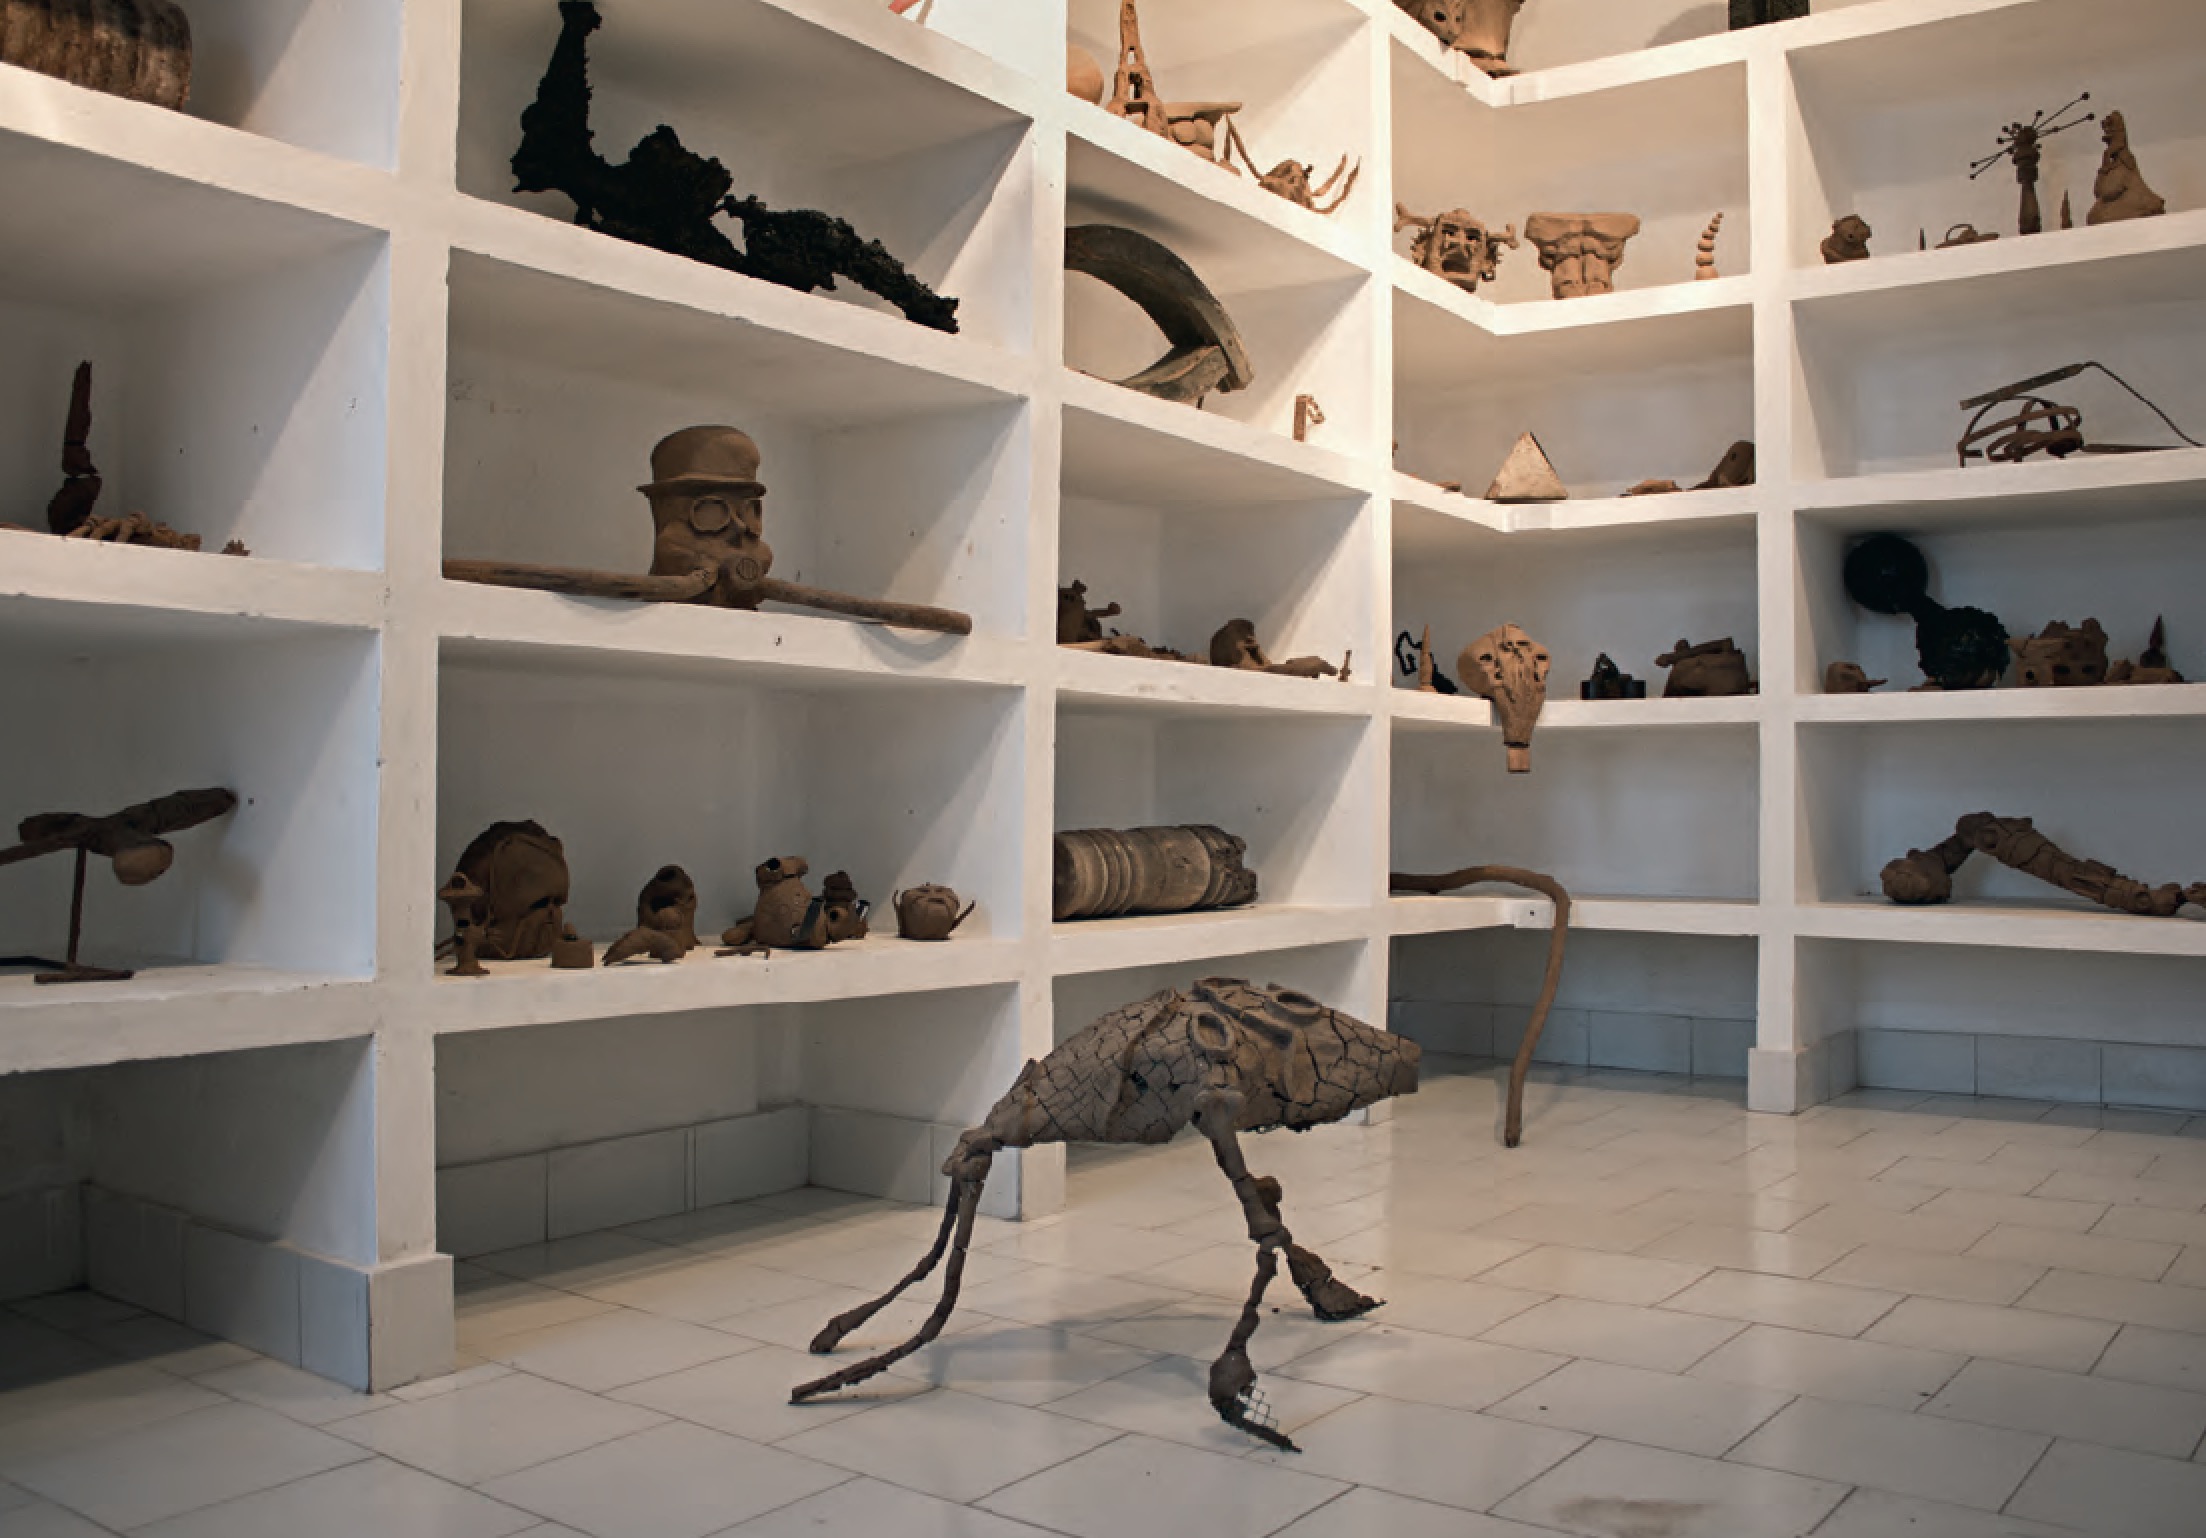 HARBINGER, 2014 Found object armatures and unfired clay Variable dimensions Installation views, ‘Whorled Explorations’ exhibition, Kochi- Muziris Biennale, Kochi, India Sahej - Sahej Rahal, Courtesy the artist and Chatterjee & Lal